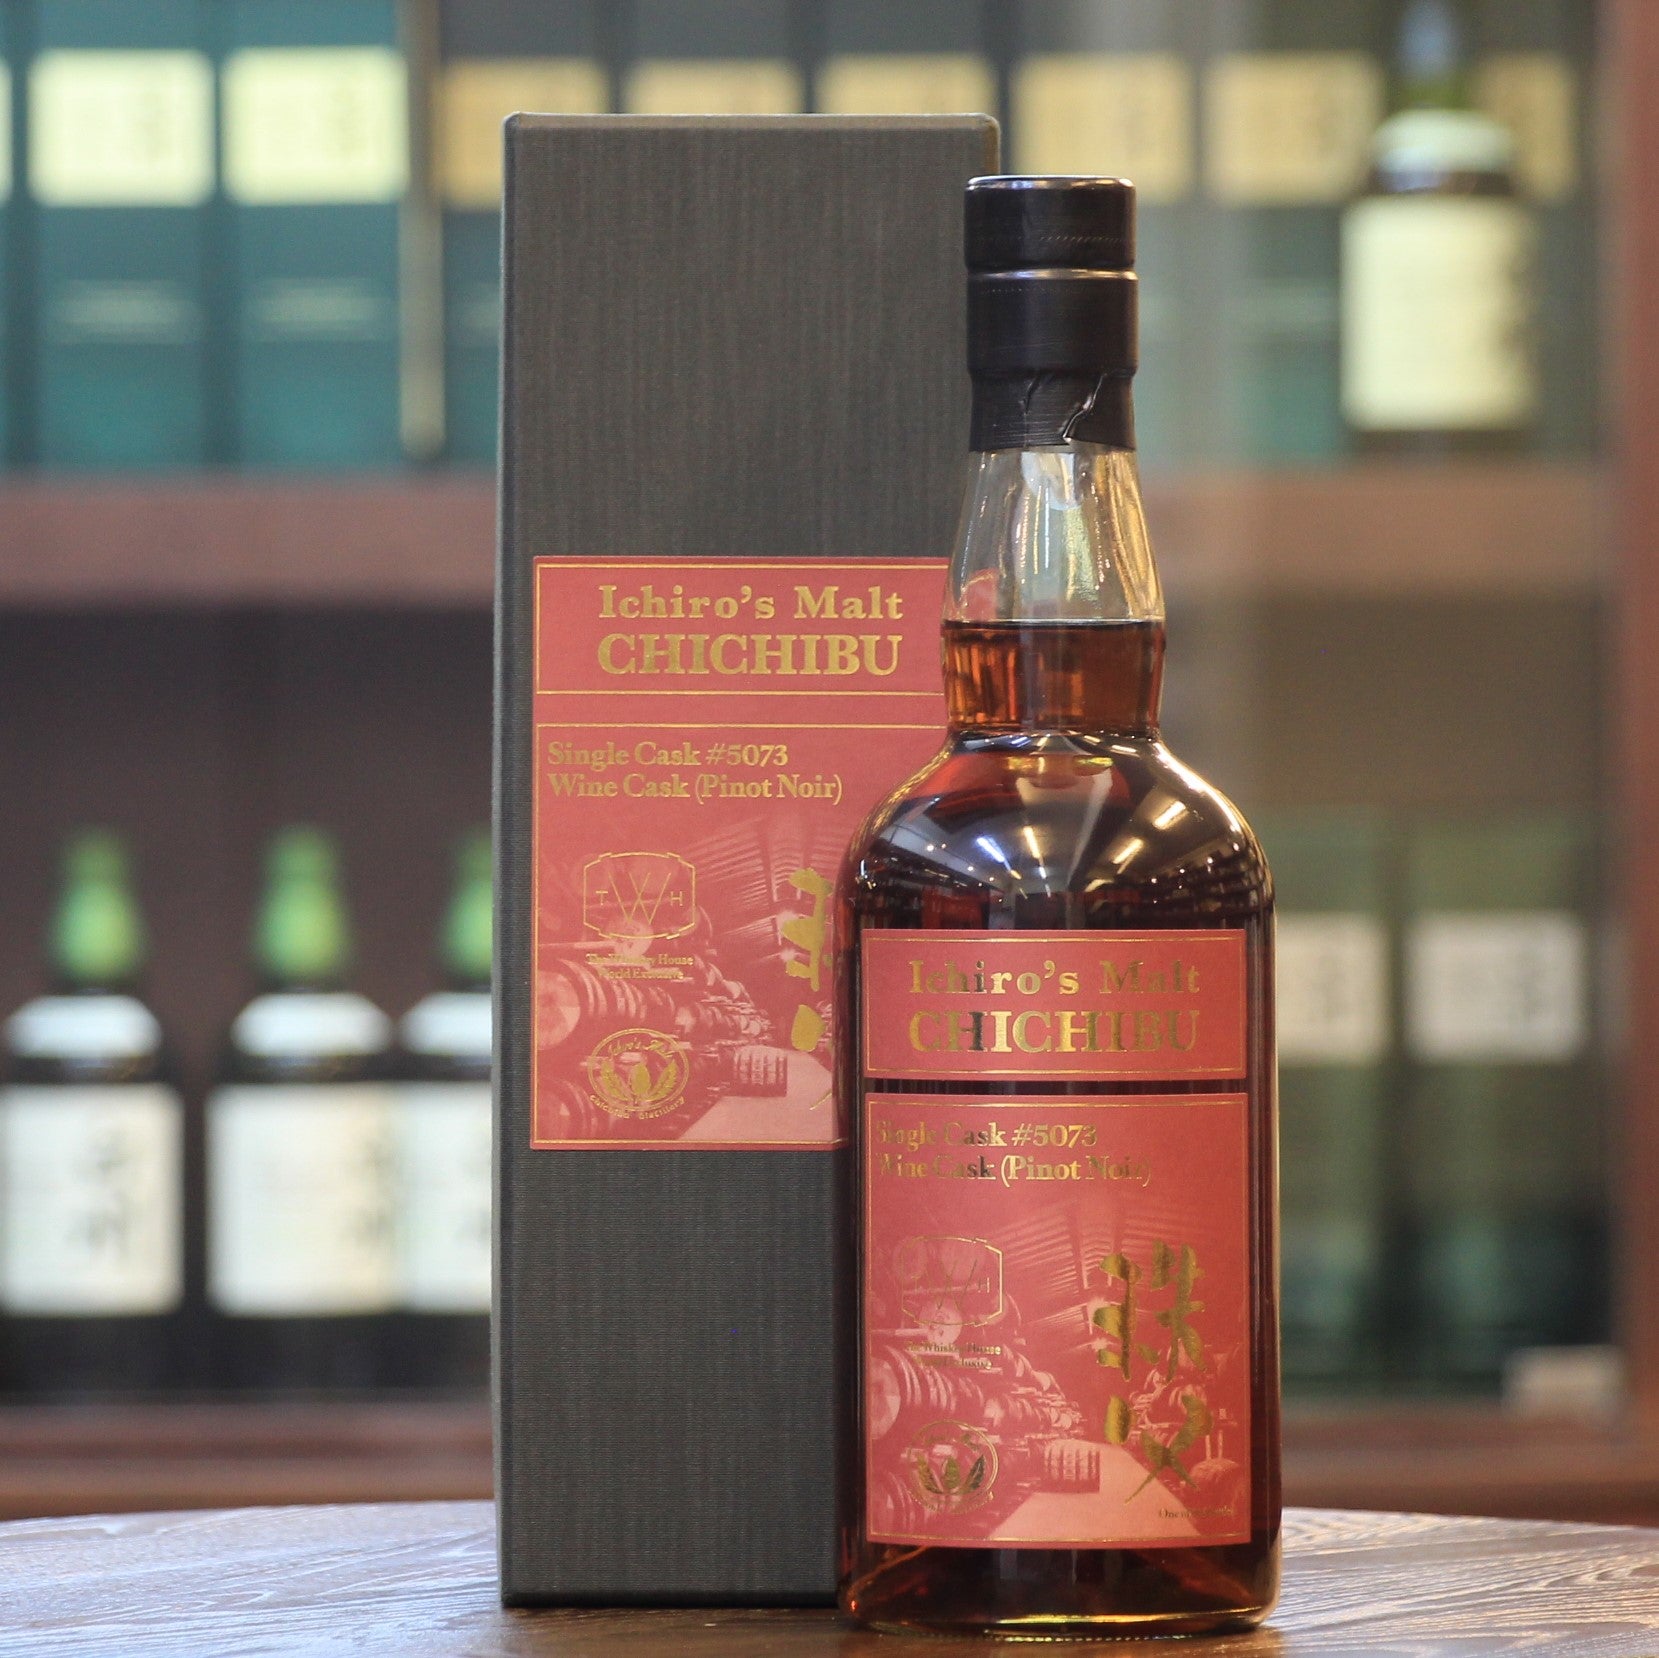 This was an exclusive Chichibu Single Cask bottling for The Whisky House at DFS Singapore. Using Concerto barley and matured in Pinot Noir wine cask #5073, this bottling was distilled in June 2012 and bottled in April 2018. Only 216 bottles were released. 